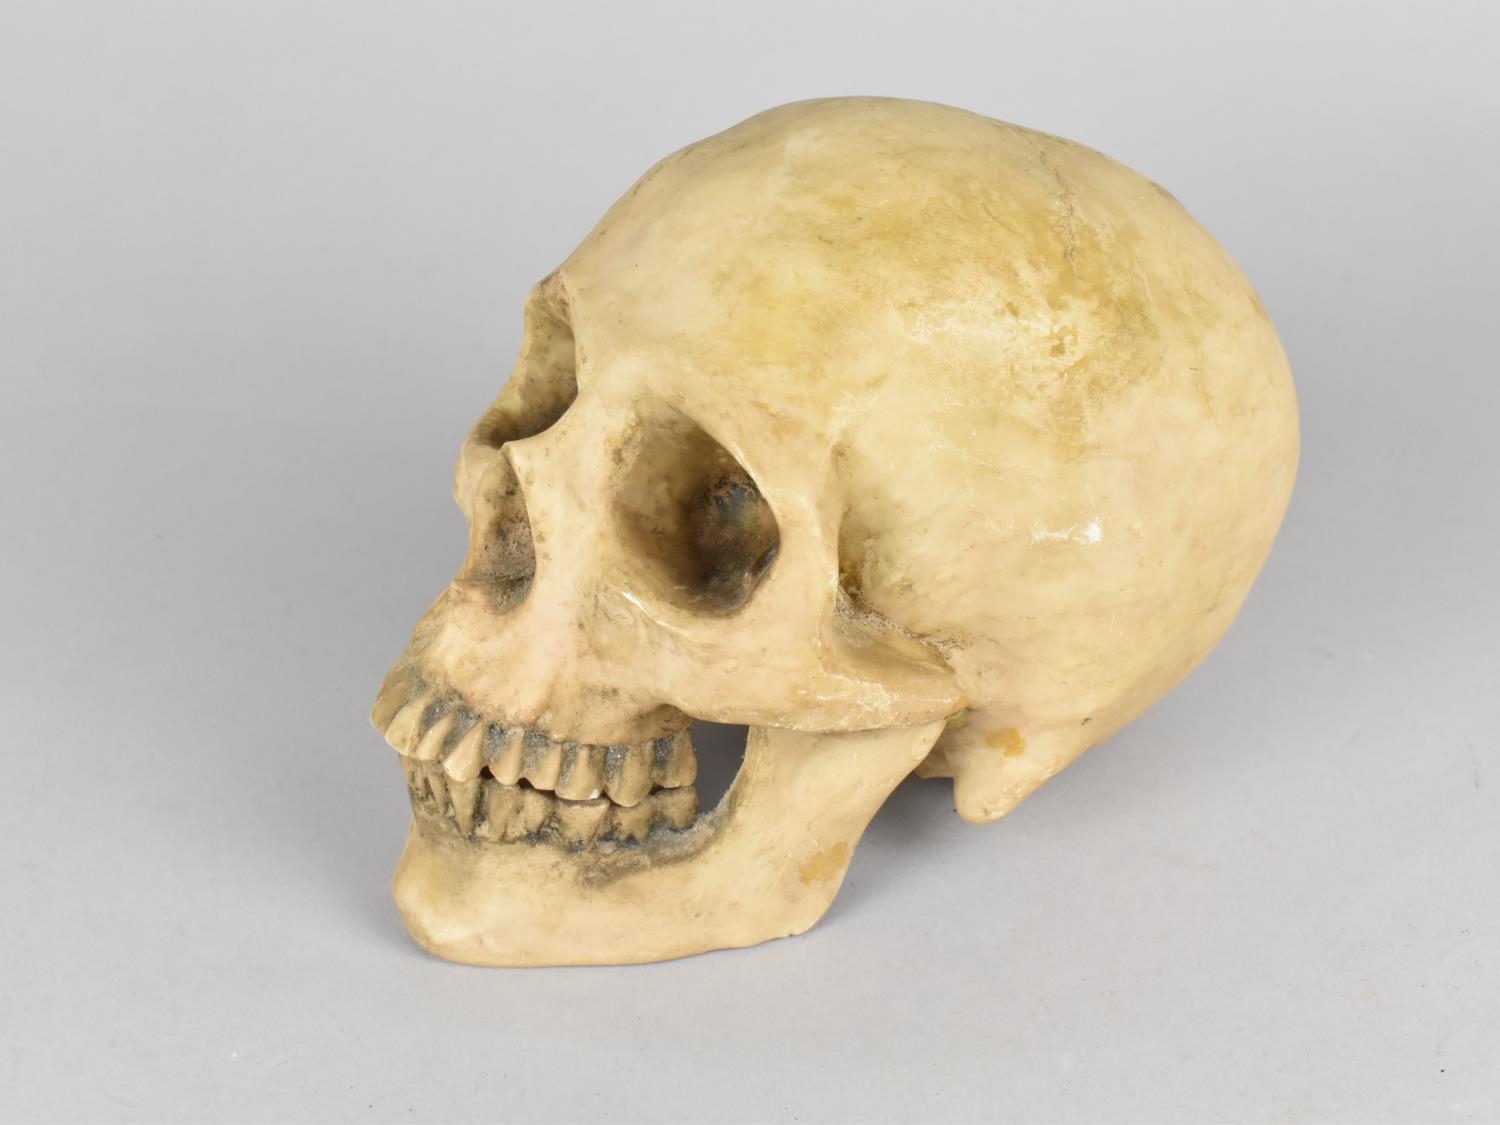 A Cast Resin Study of a Human Skull, Perhaps Teaching Aid, 18cms Long - Image 2 of 2